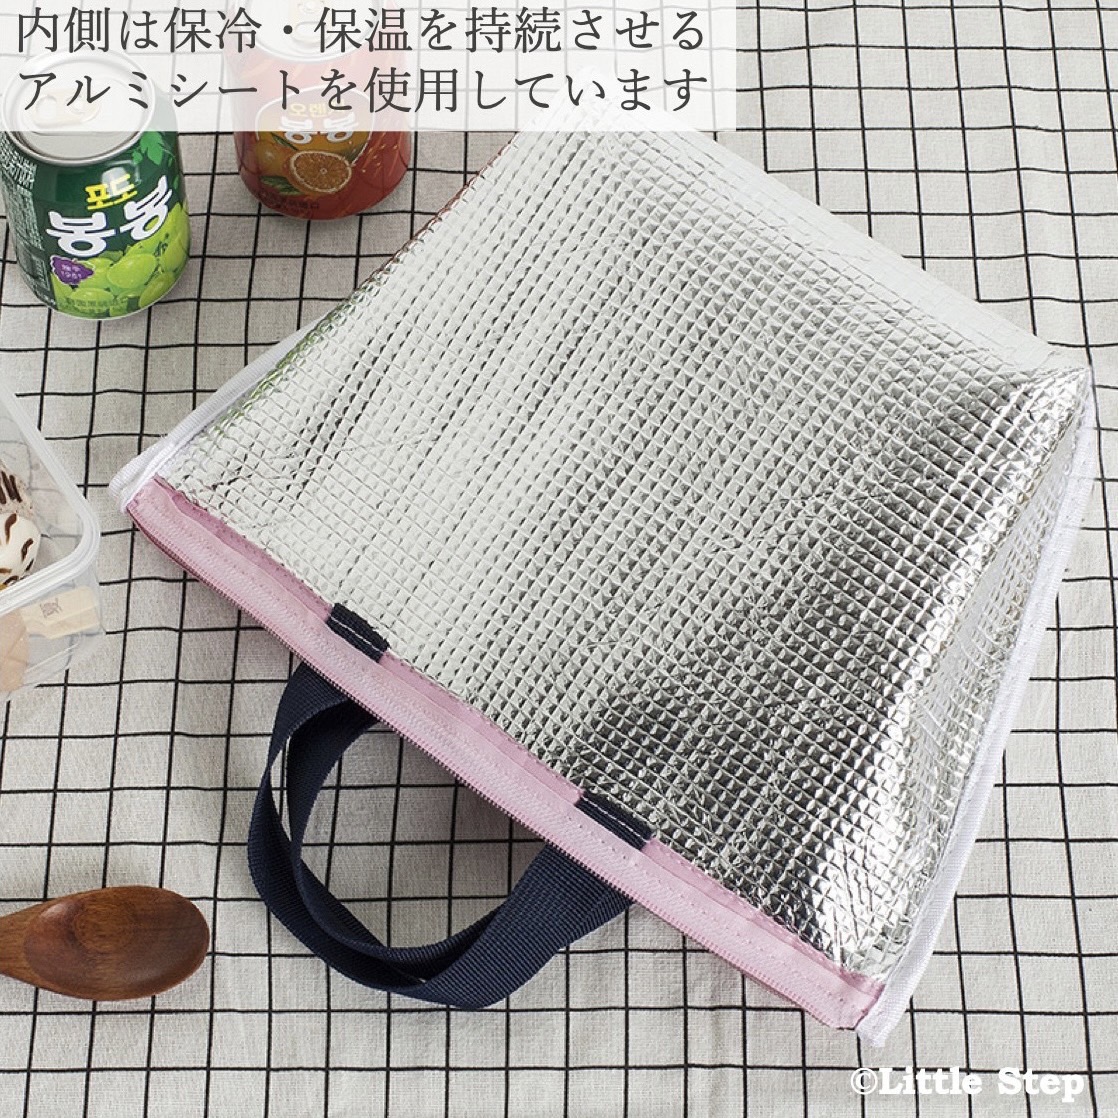  lunch bag keep cool heat insulation largish length length men's lady's flask . go in . stylish bento bag pouch Northern Europe 